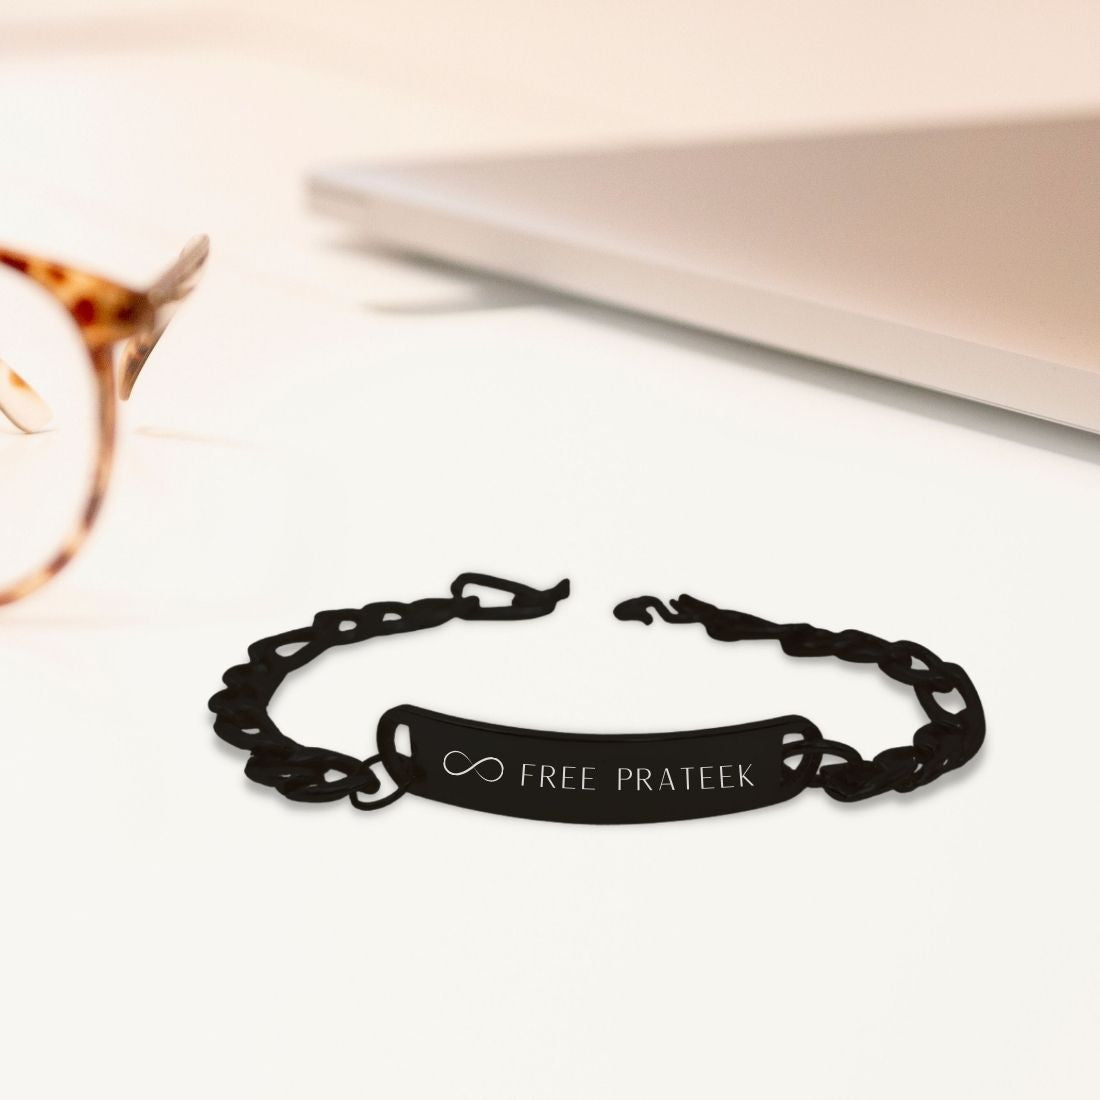 Newly Released Dopamine Color Fashionable Personality Bracelet For Women,  Instagram Style Niche Design Accessory | SHEIN